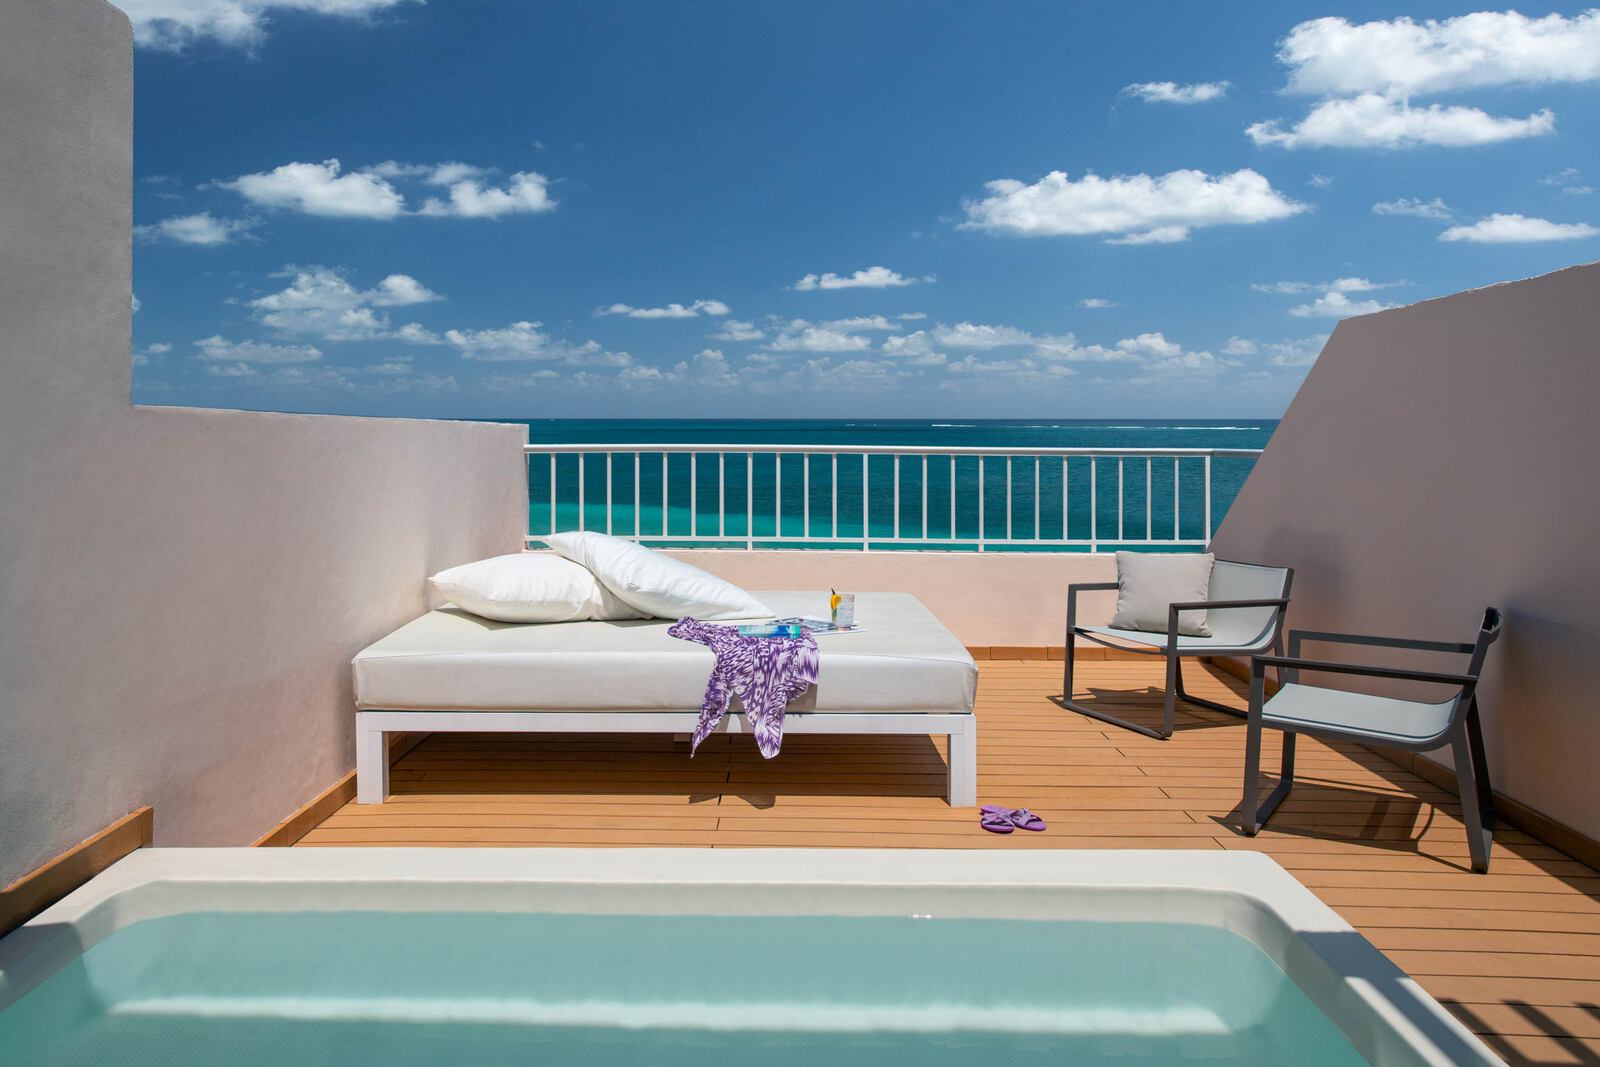 Room rooftop terrace with large jacuzzi and day bed with ocean view